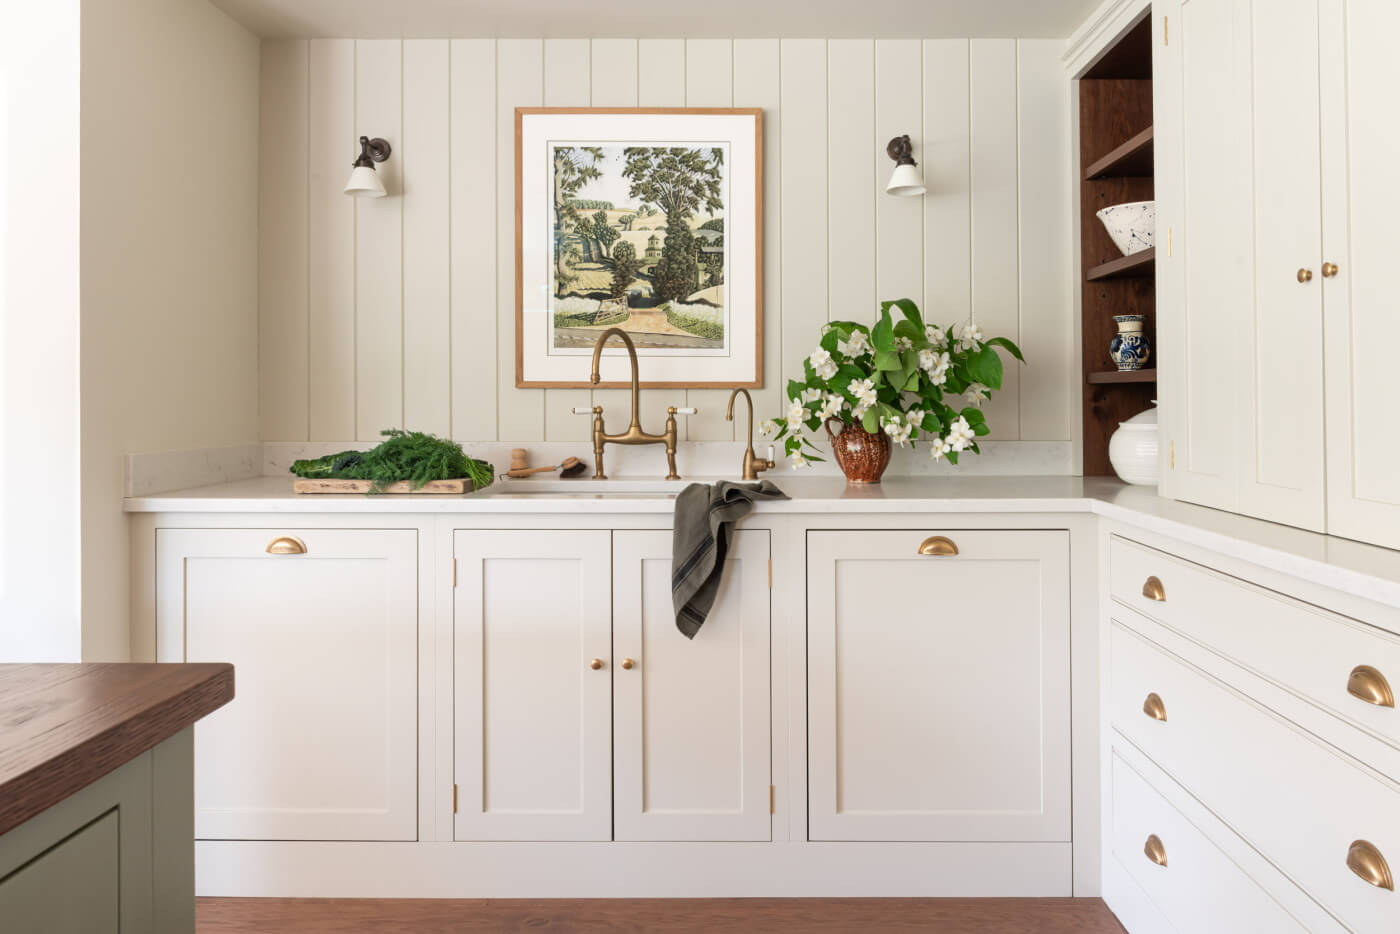 Panelling in the kitchen